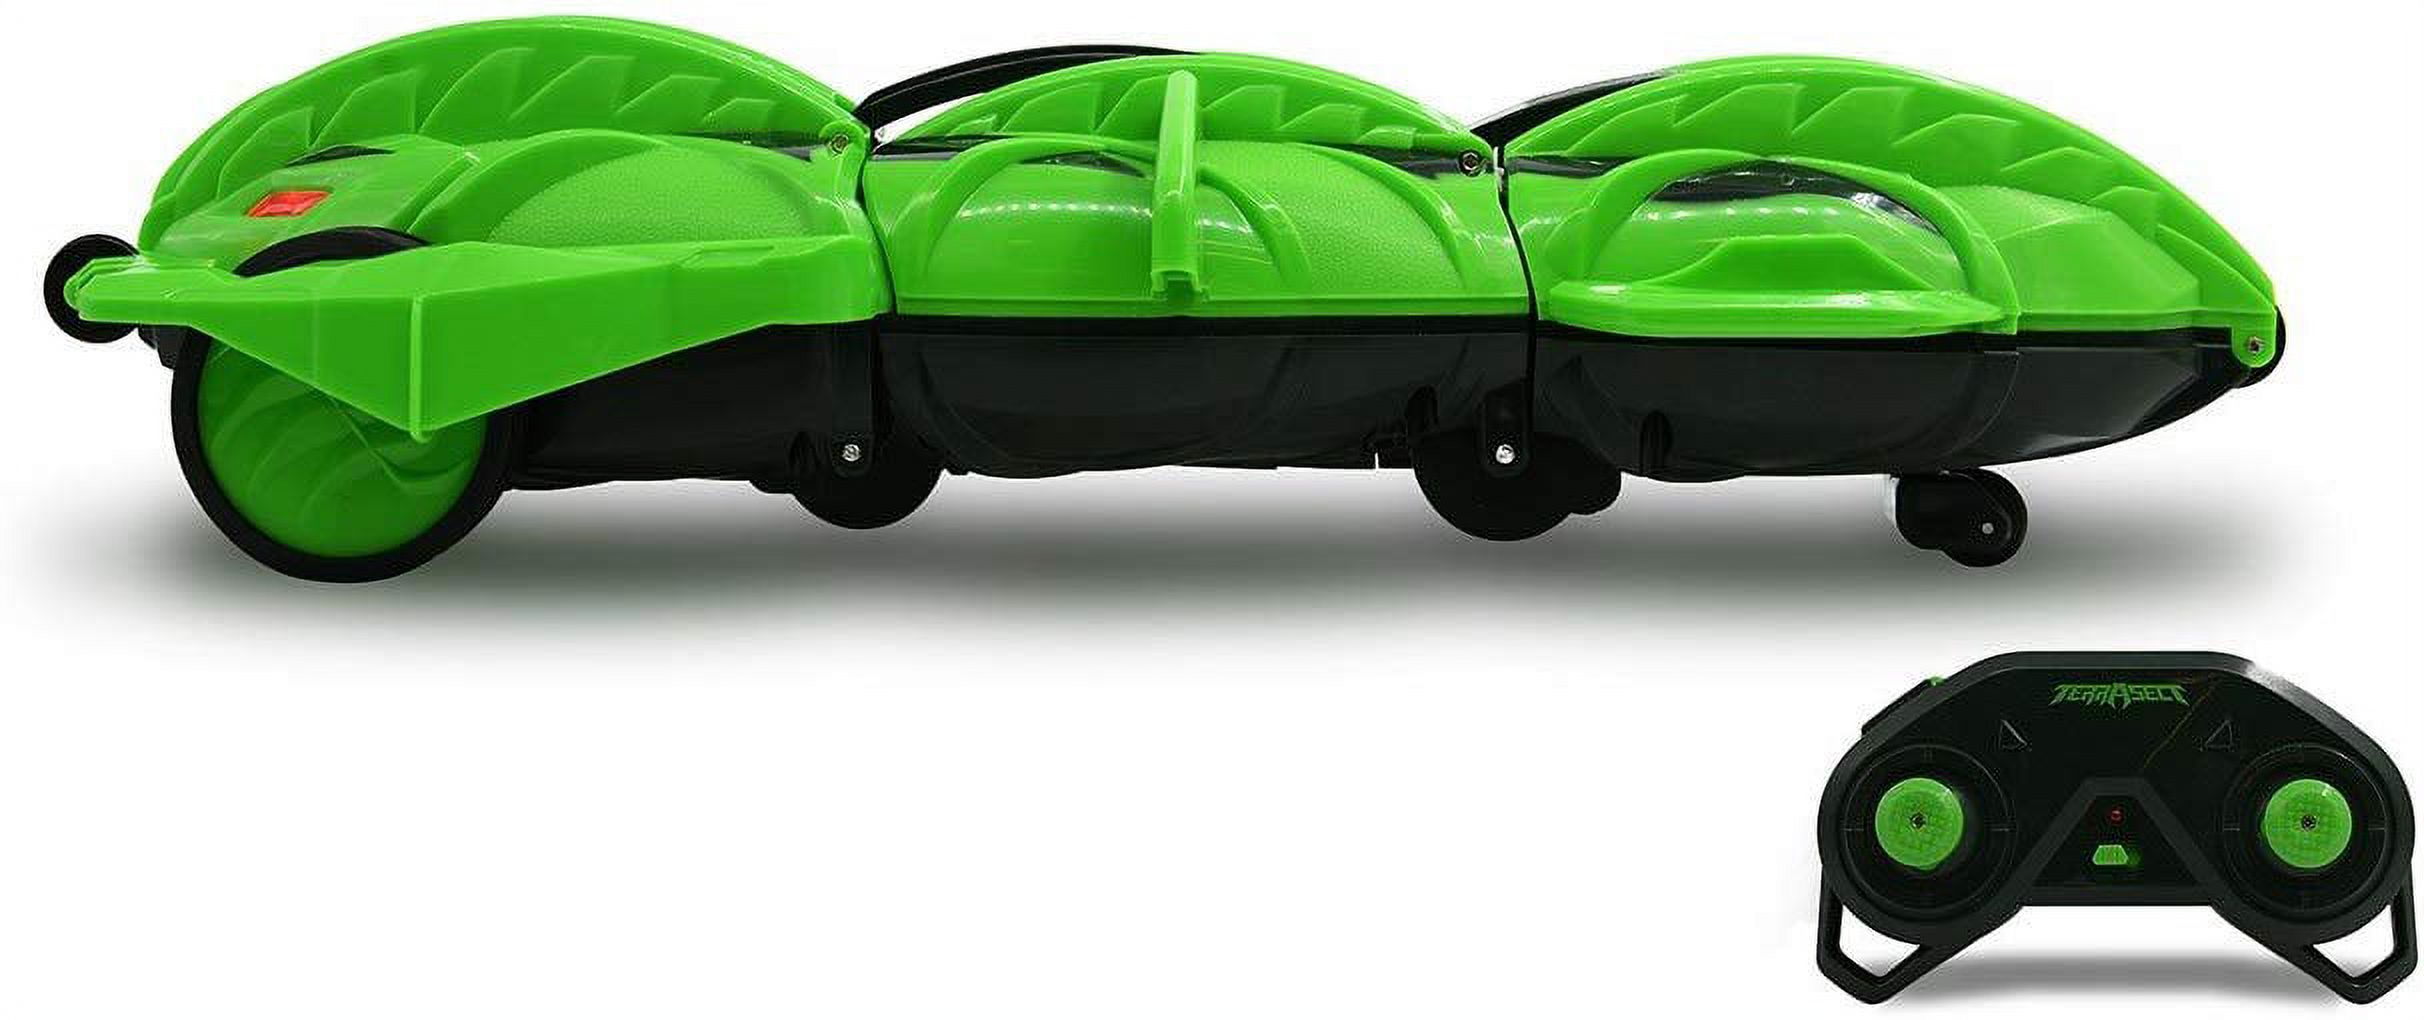 Terrasect Remote Control Transforming Vehicle, Green, 2.4 Ghz - image 2 of 9